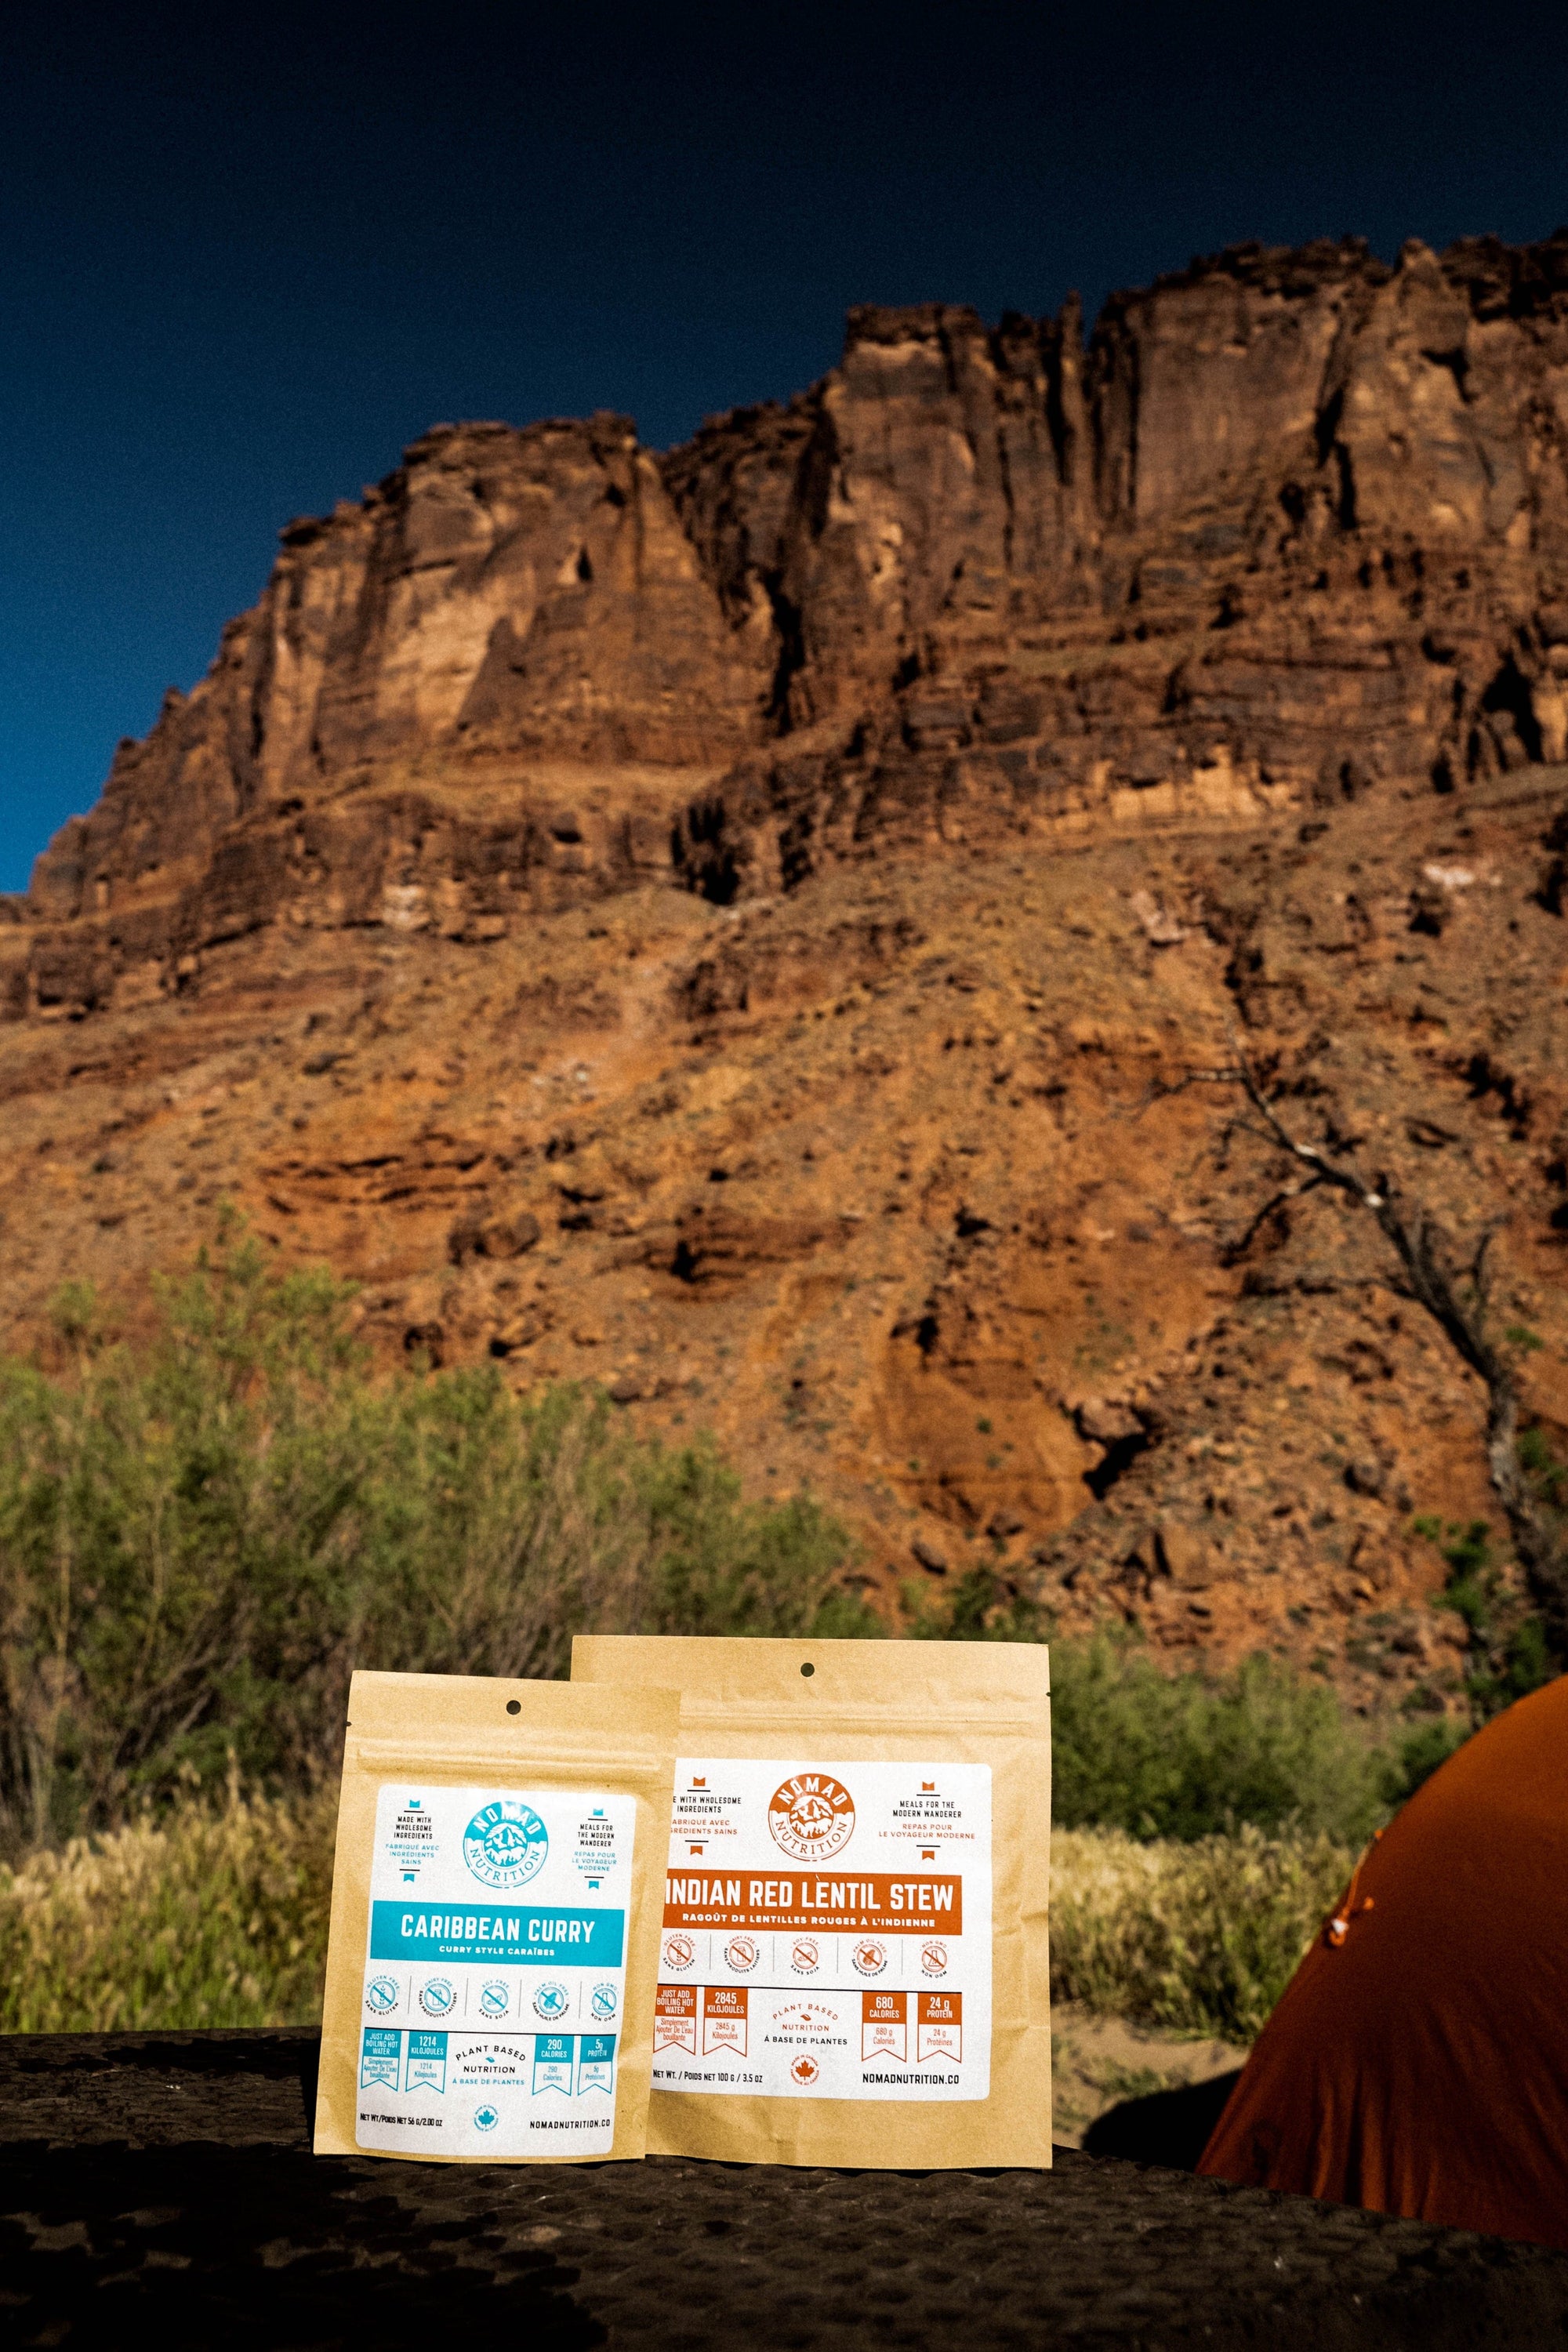 Nomad Nutrition Carribean Curry (56g/ 2oz) and Indian Red Lentil Stew (112g/ 4oz), dehydrated vegan adventure plant-based, gluten-free meal at Arches National Park with canyons visible in the background.